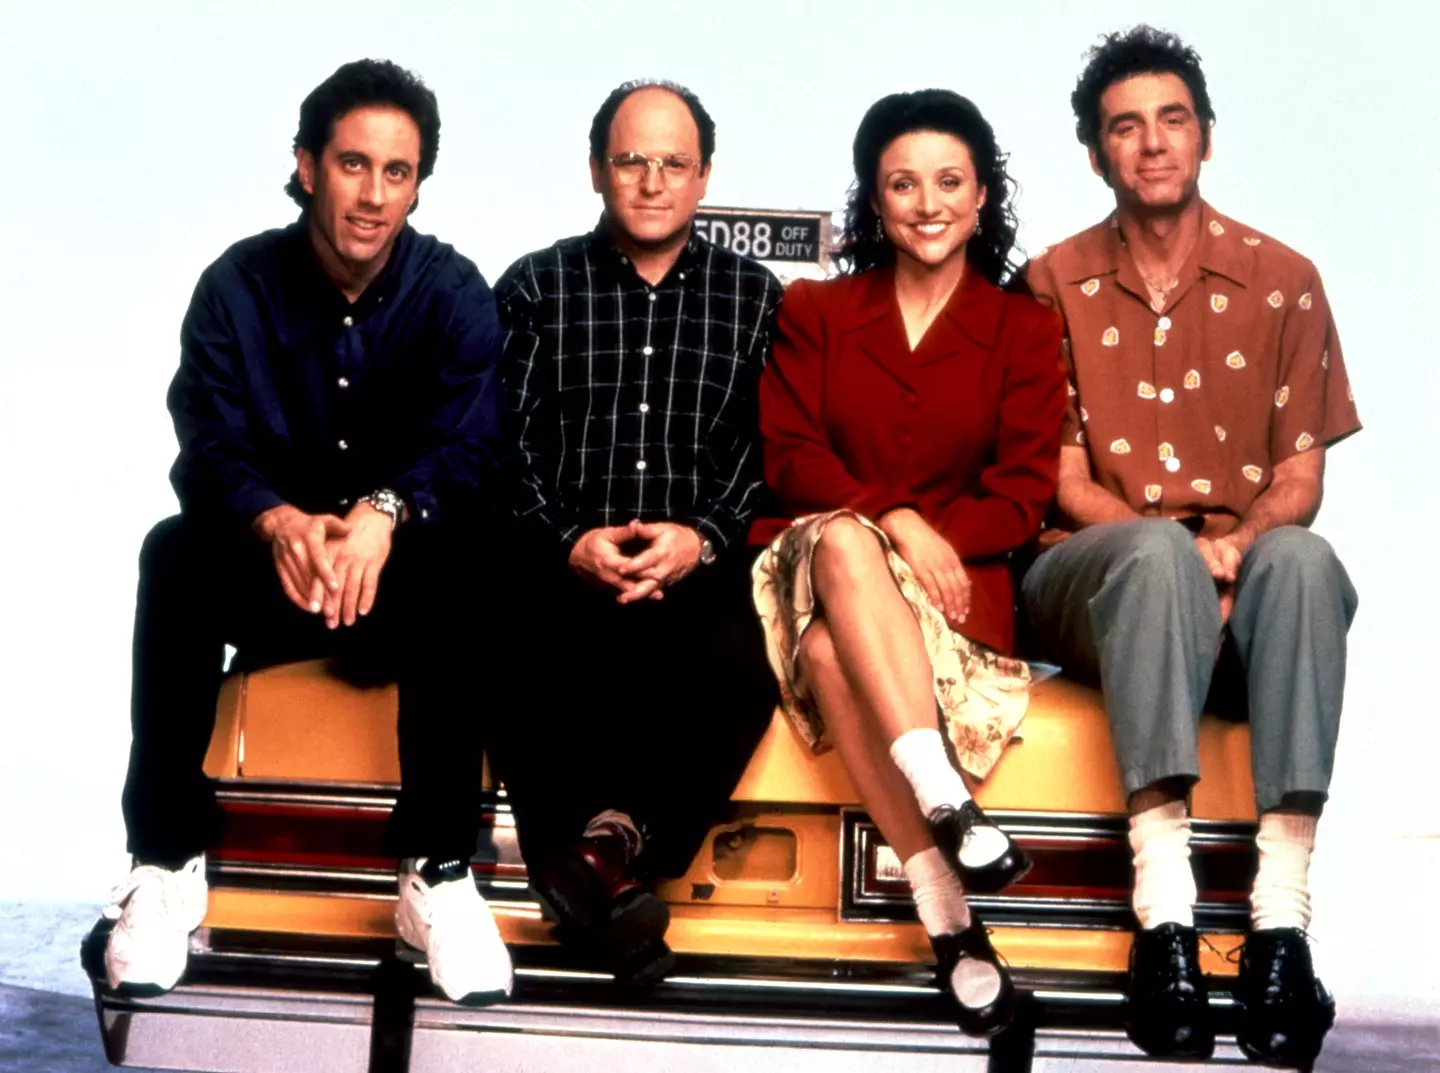 The show runs forever on Twitch and is a parody of hit sitcom Seinfeld.